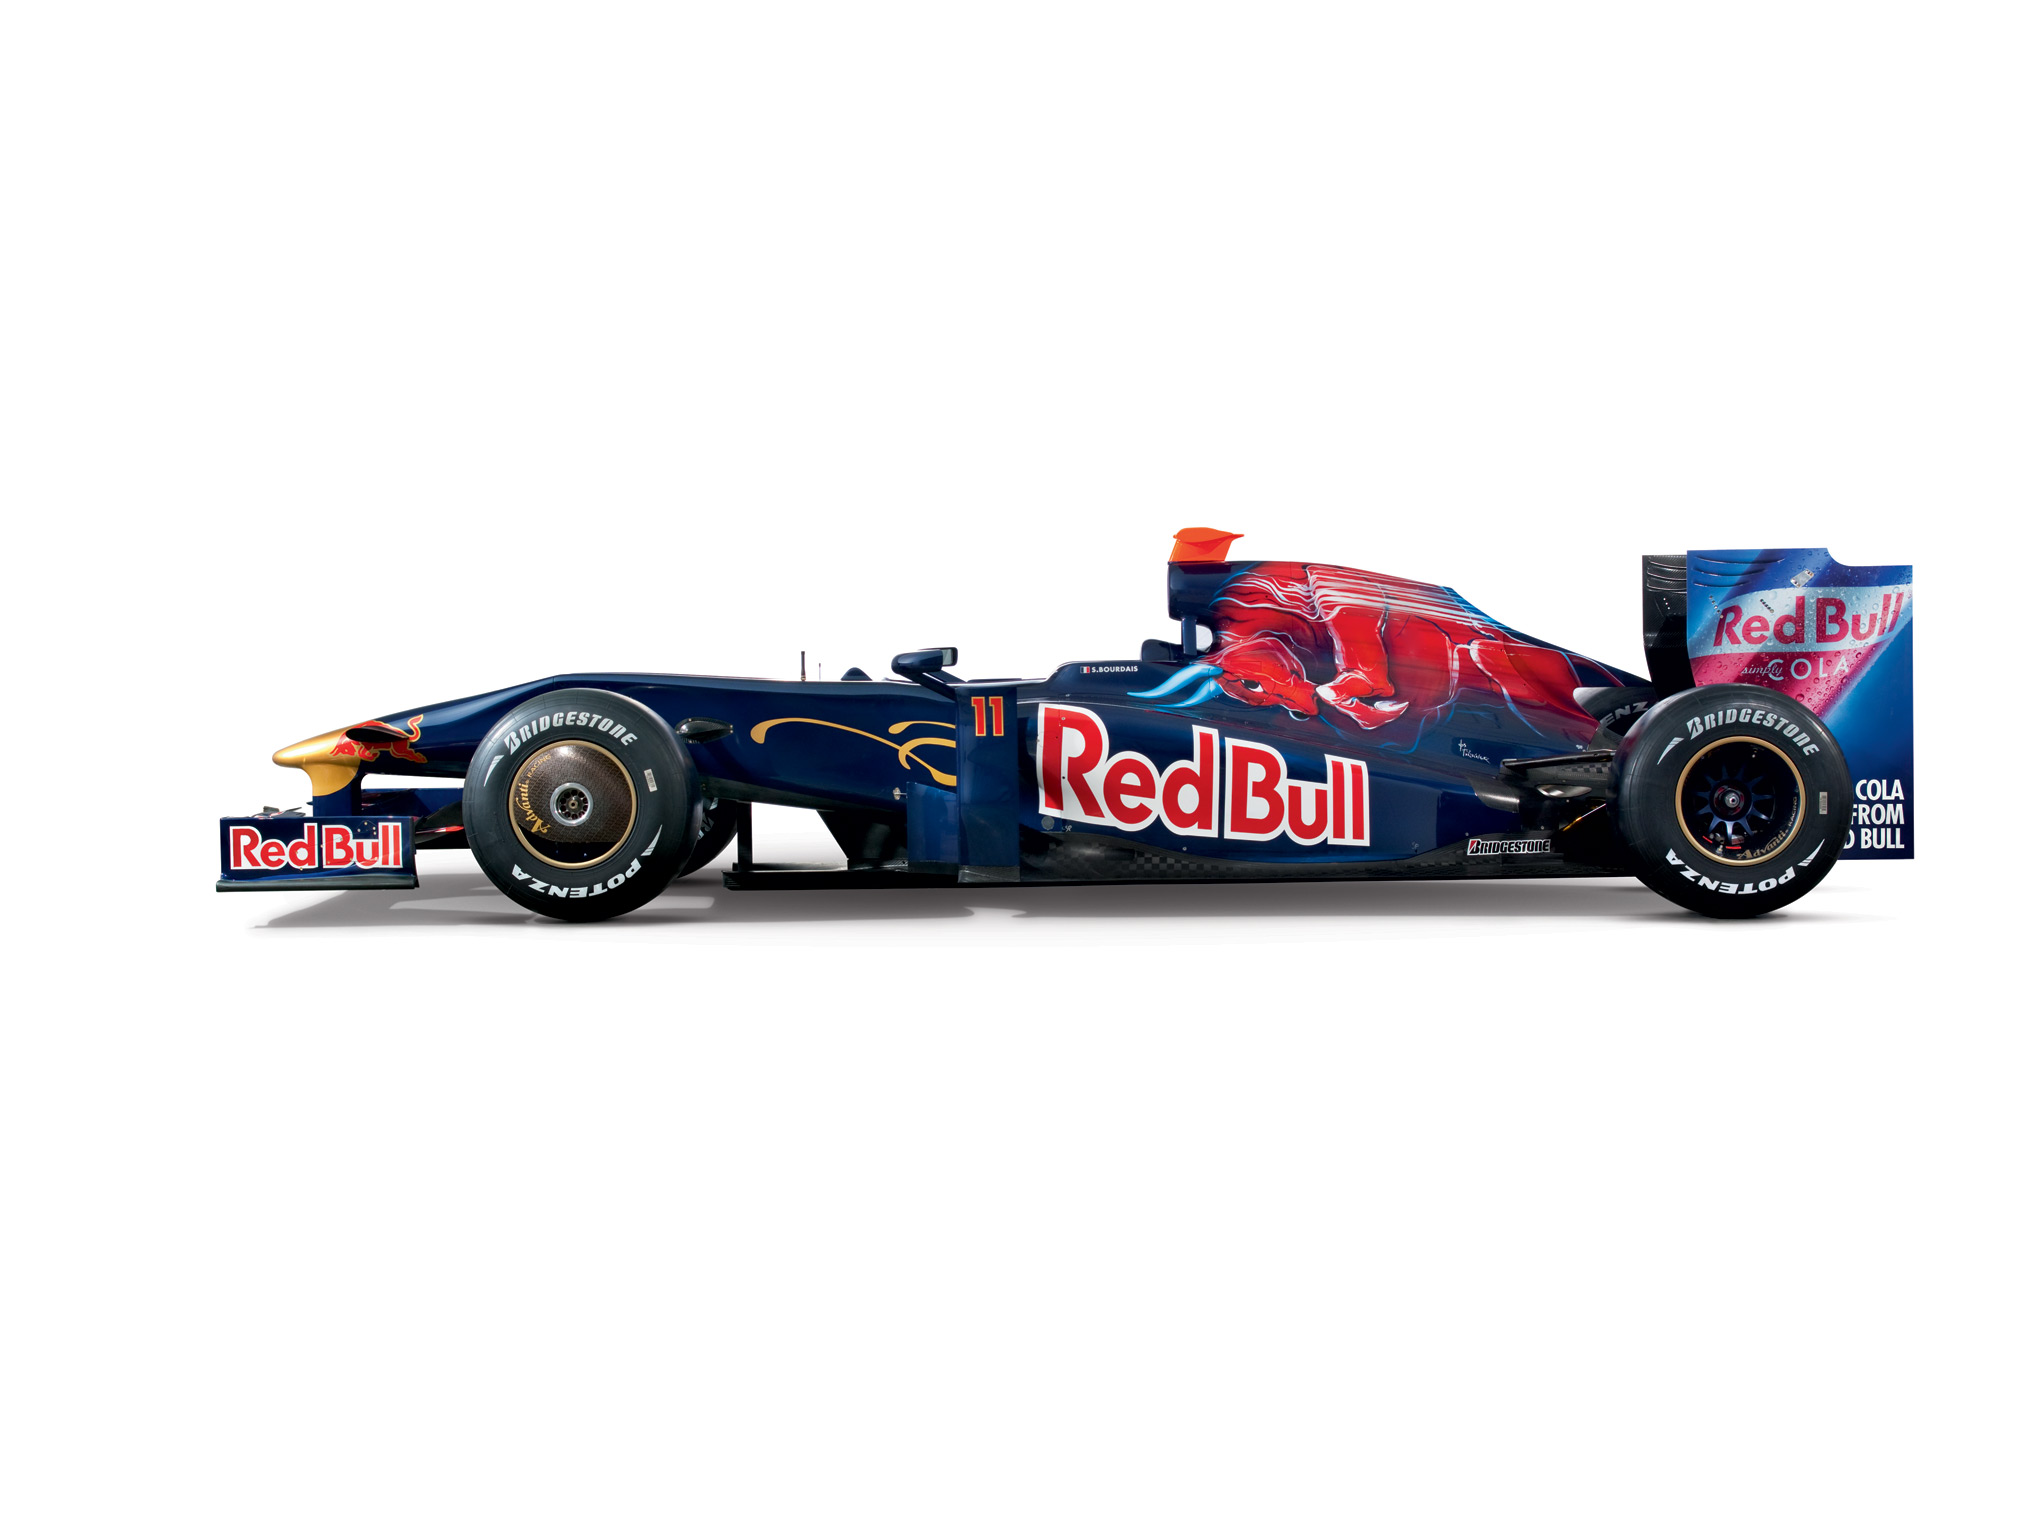 Toro rosso str4. Best photos and information of model.